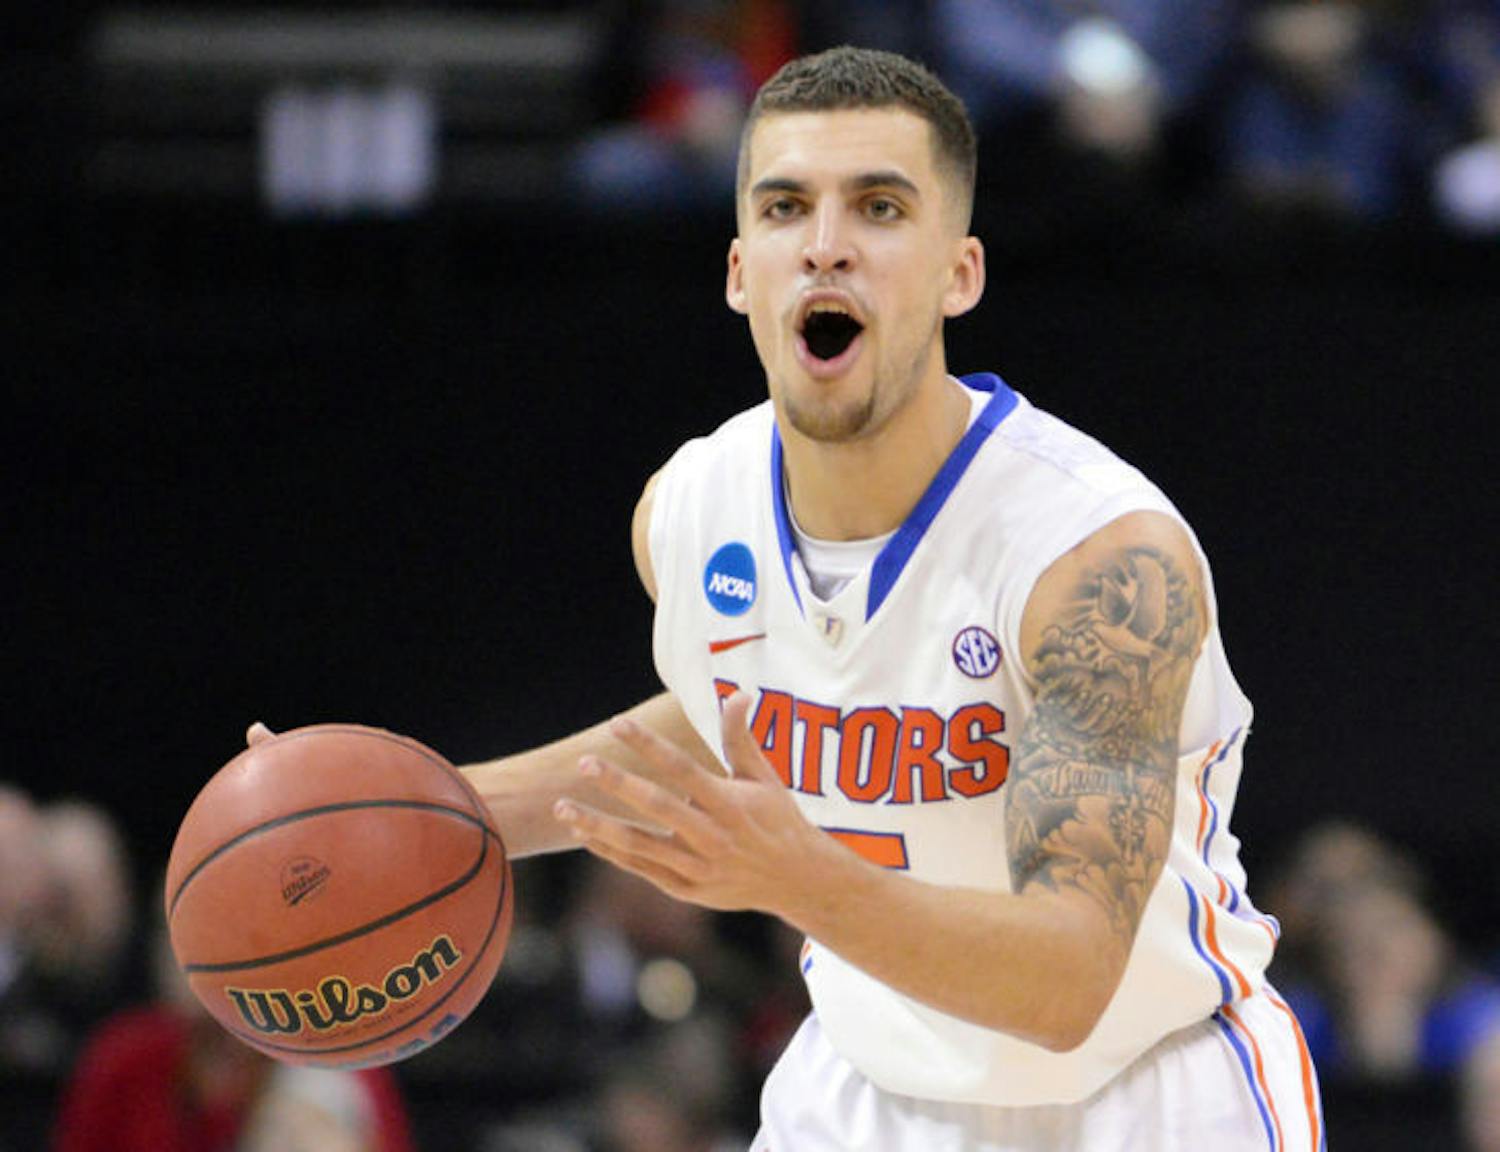 Scottie Wilbekin calls out a play during Florida’s 62-52 win against Dayton on Saturday in FedExForum in Memphis, Tenn. Wilbekin was in the locker room with a high ankle sprain when Connecticut guard Shabazz Napier hit his buzzer-beater shot to top Florida 65-64 on Dec. 2.